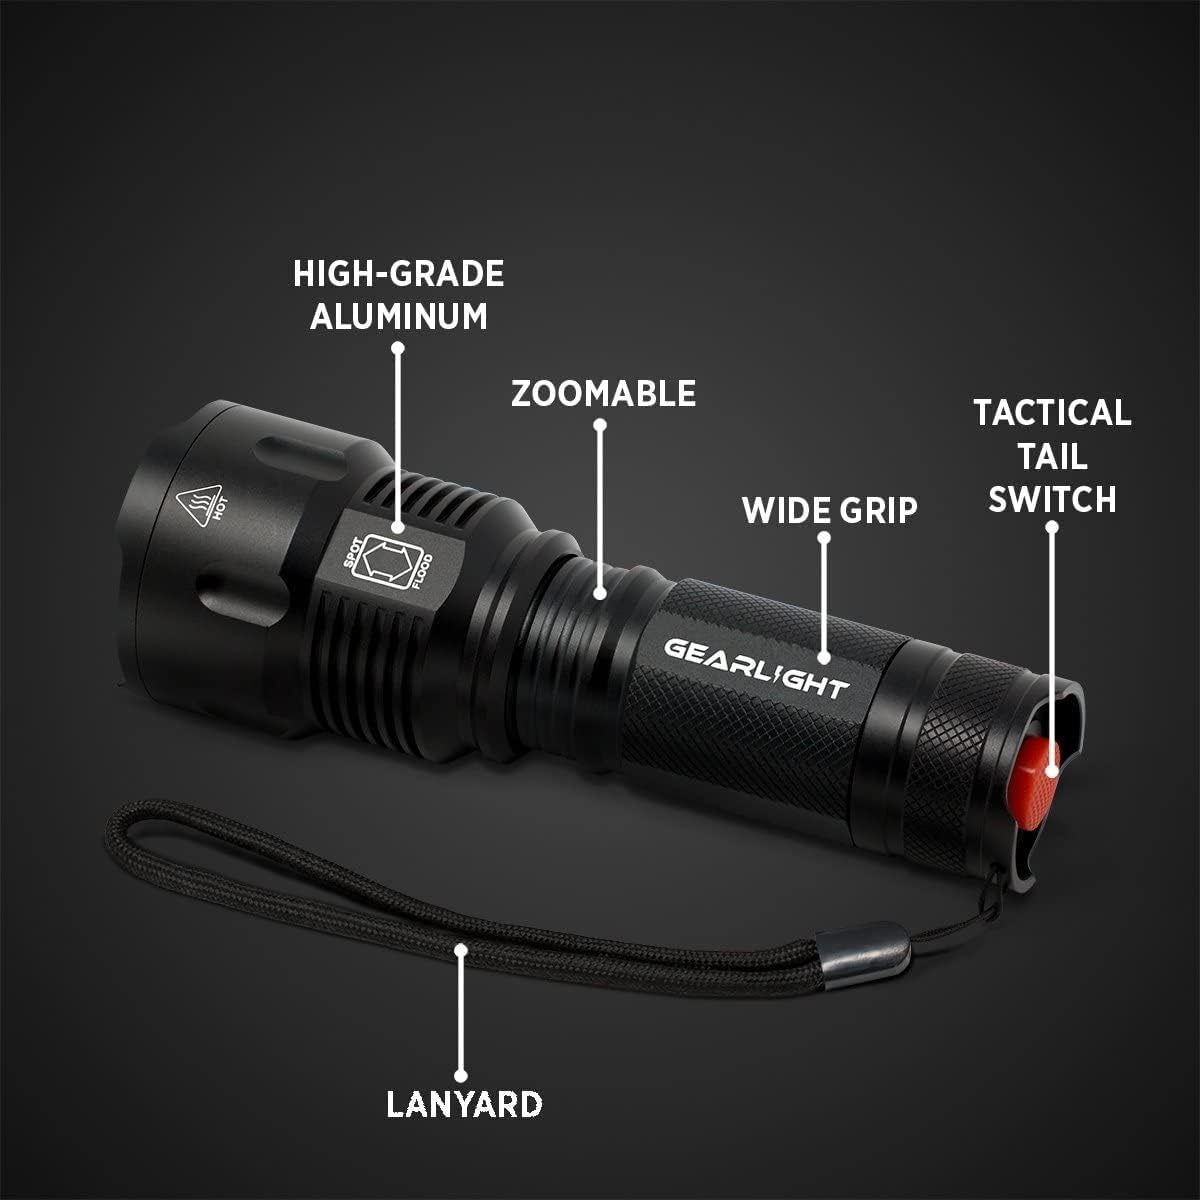 GearLight High-Powered LED Flashlight S1200 - Mid Size, Zoomable, Water Resistant, Handheld Light - High Lumen Camping, Outdoor, Emergency Flashlights - image 3 of 6